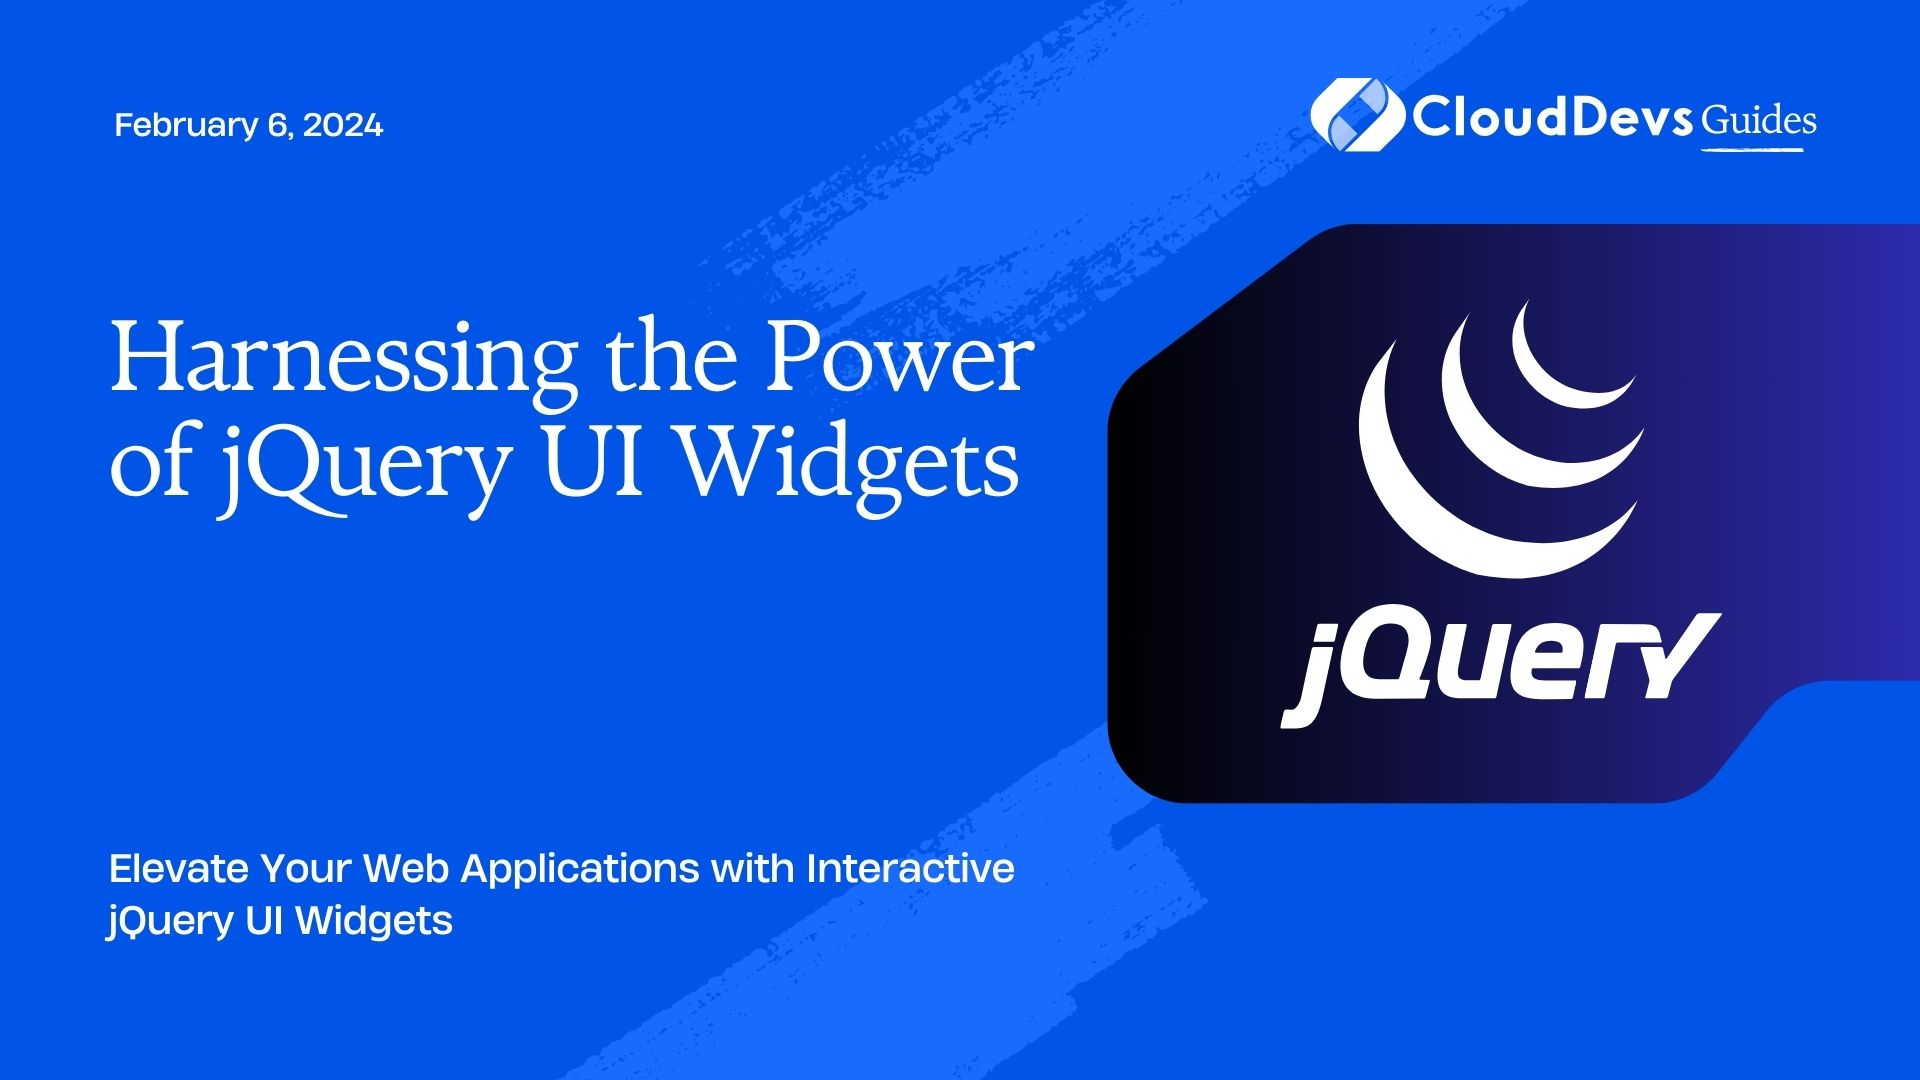 Harnessing the Power of jQuery UI Widgets